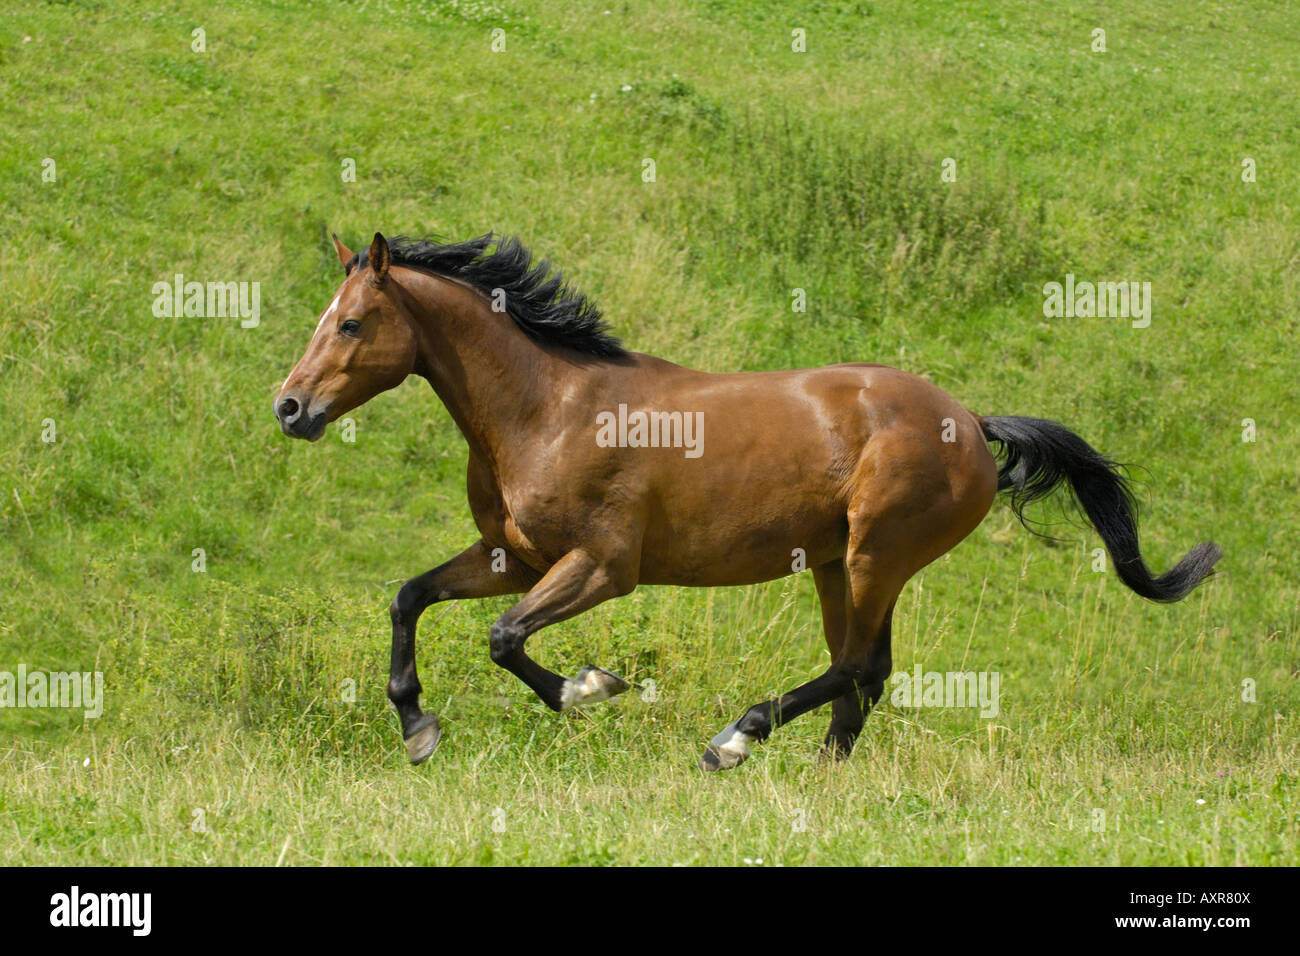 Galloping Holstein breed horse in the paddock Stock Photo